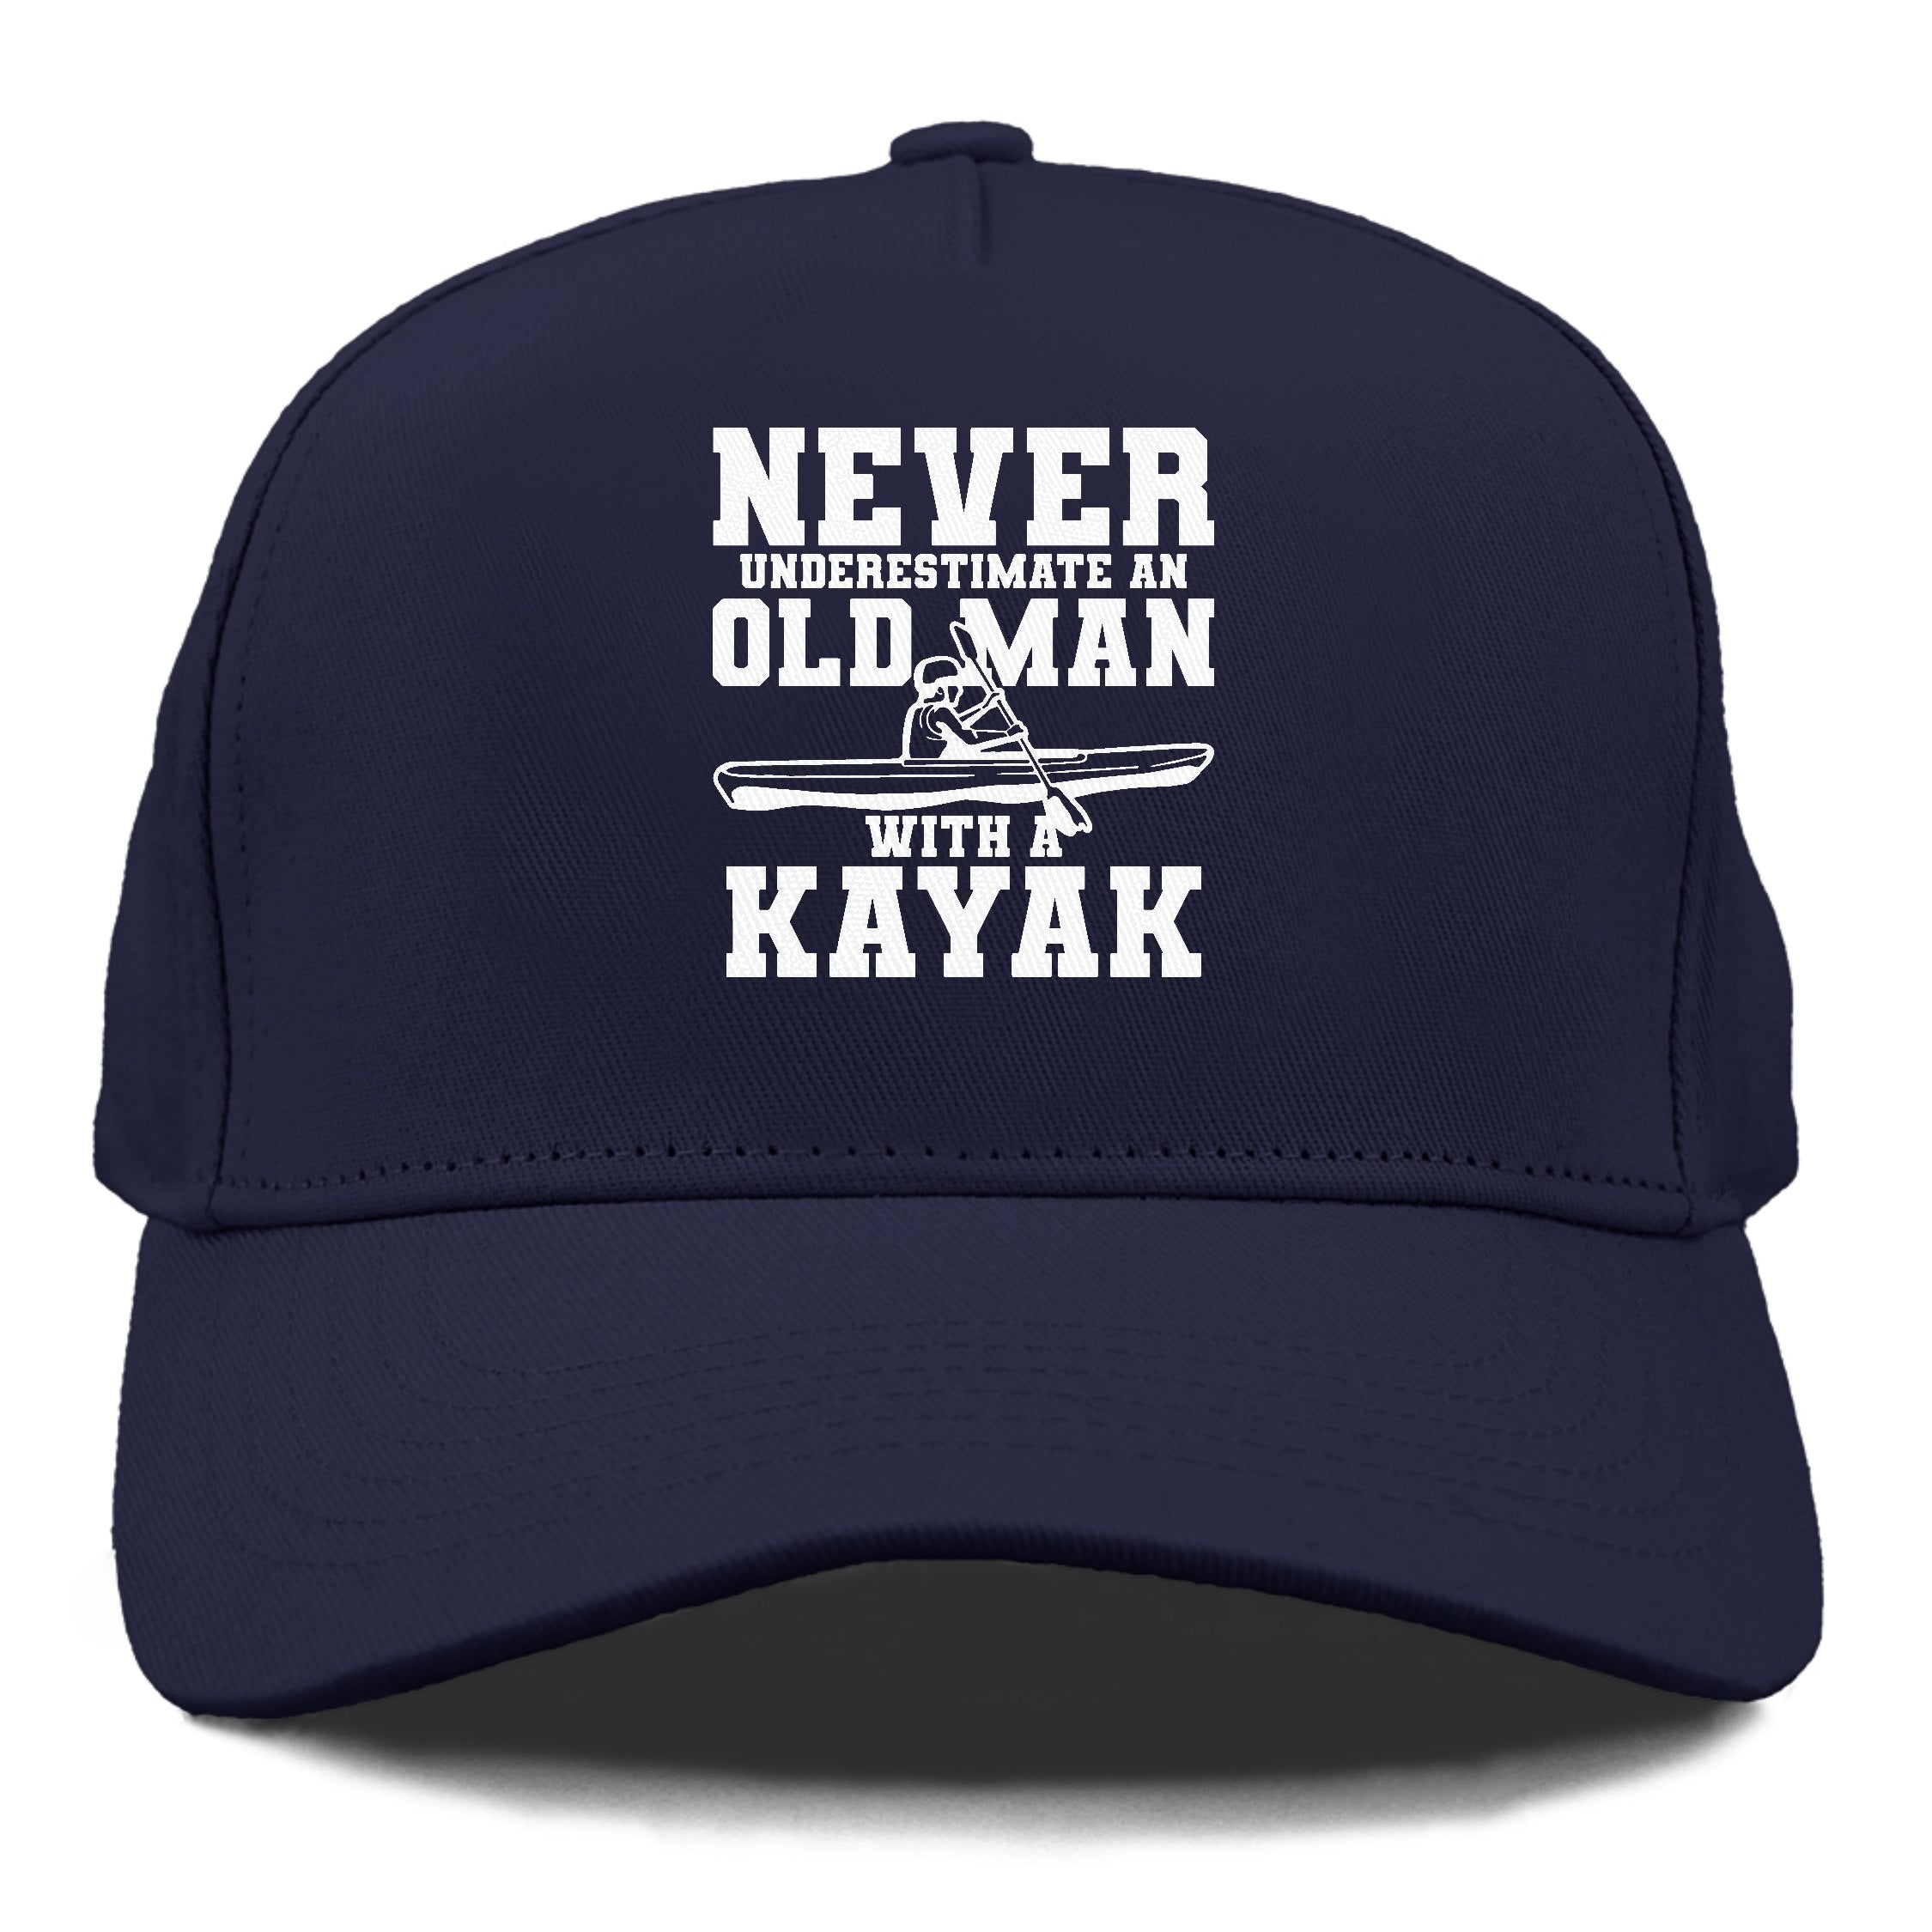 Never Underestimate An Old Man with A Kayak Vintage Baseball Cap Red